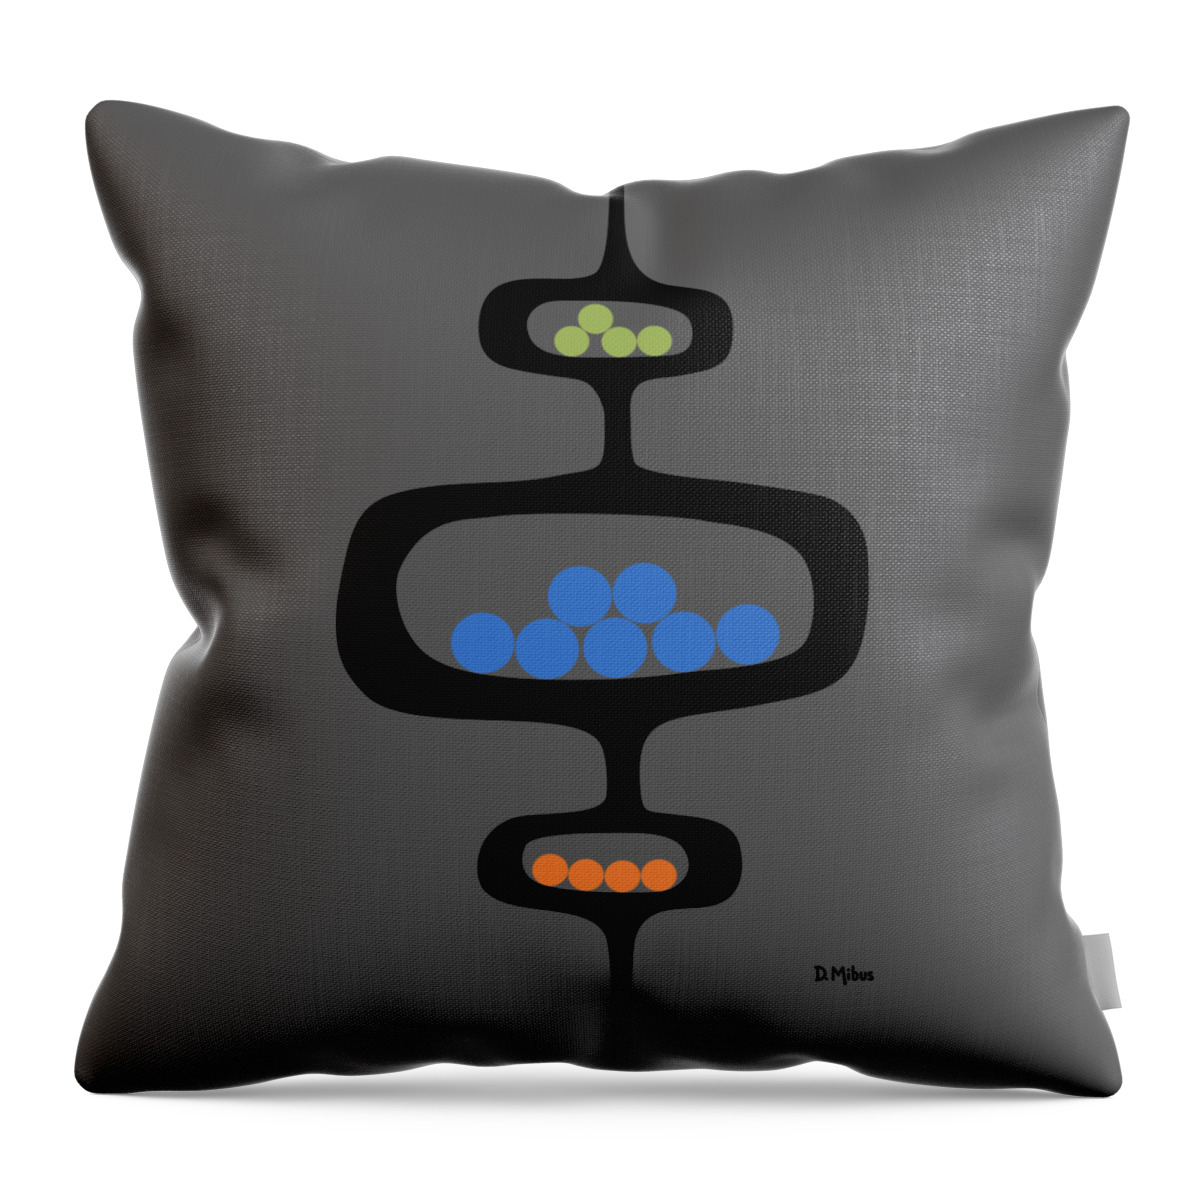 Mid Century Pods Throw Pillow featuring the digital art Mod Pod 1 with Circles by Donna Mibus